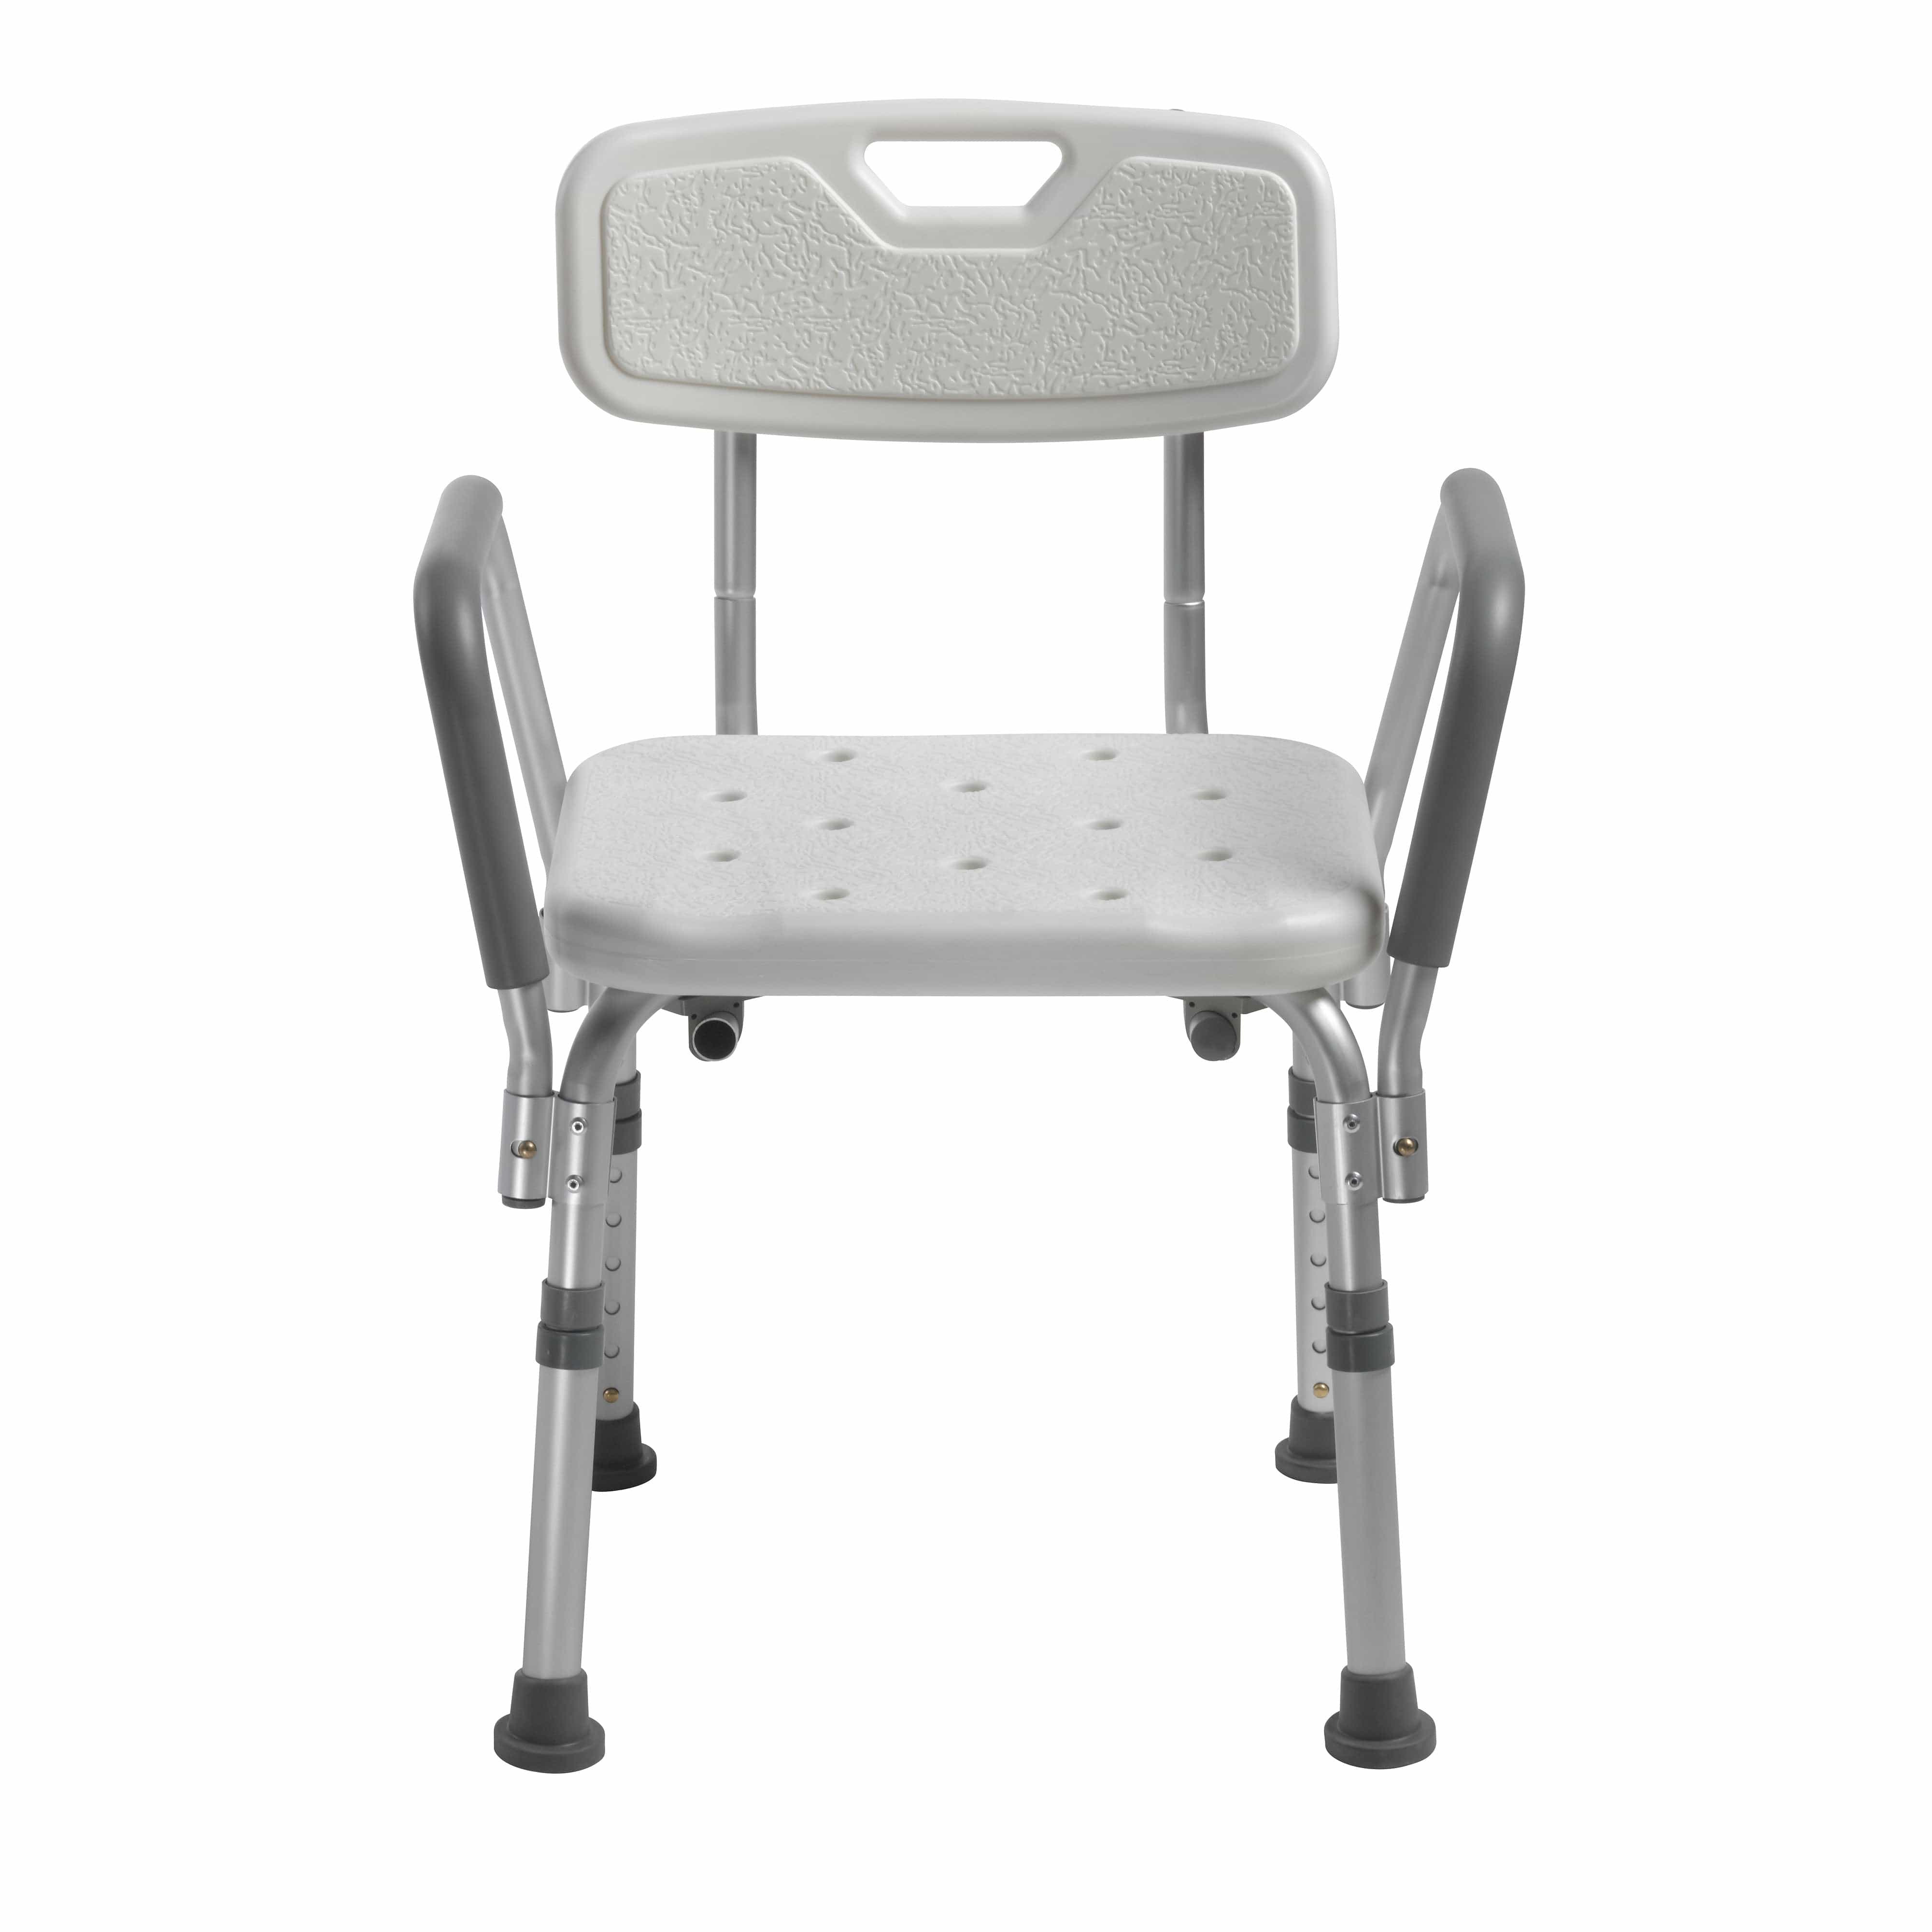 Drive Medical Drive Medical Knock Down Bath Bench with Back and Padded Arms 12445kd-1